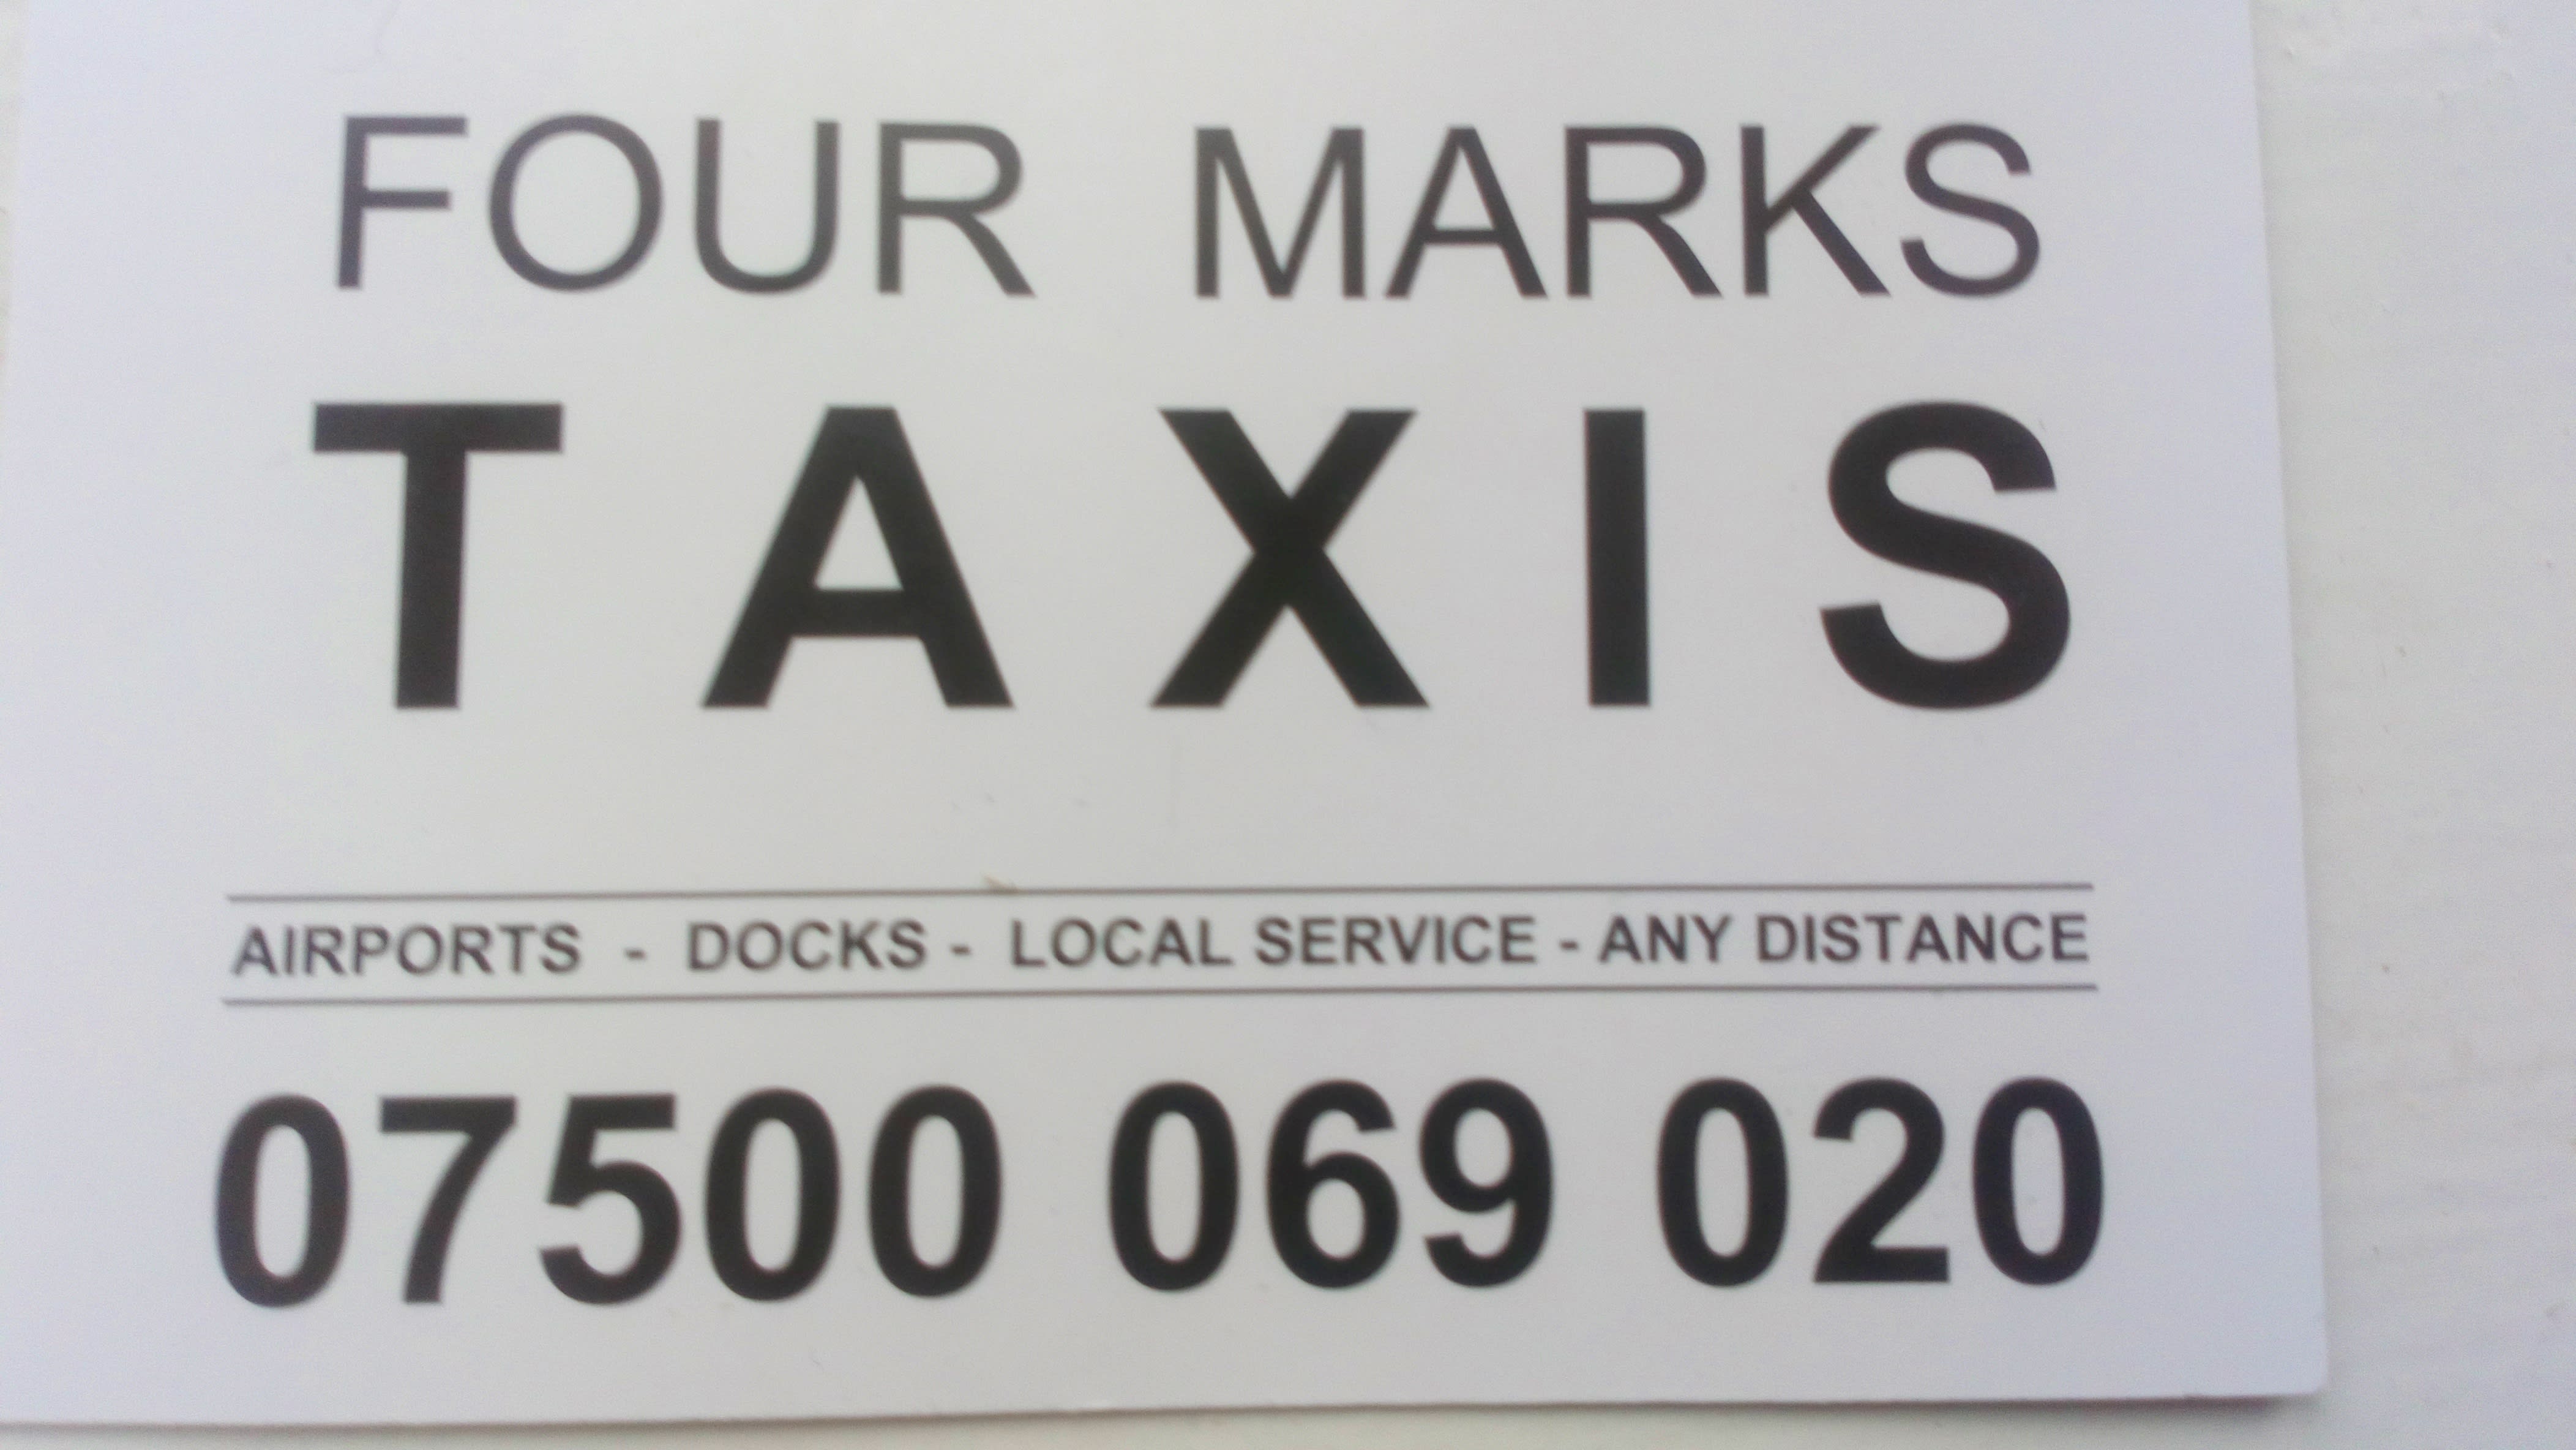 Four Marks Taxis